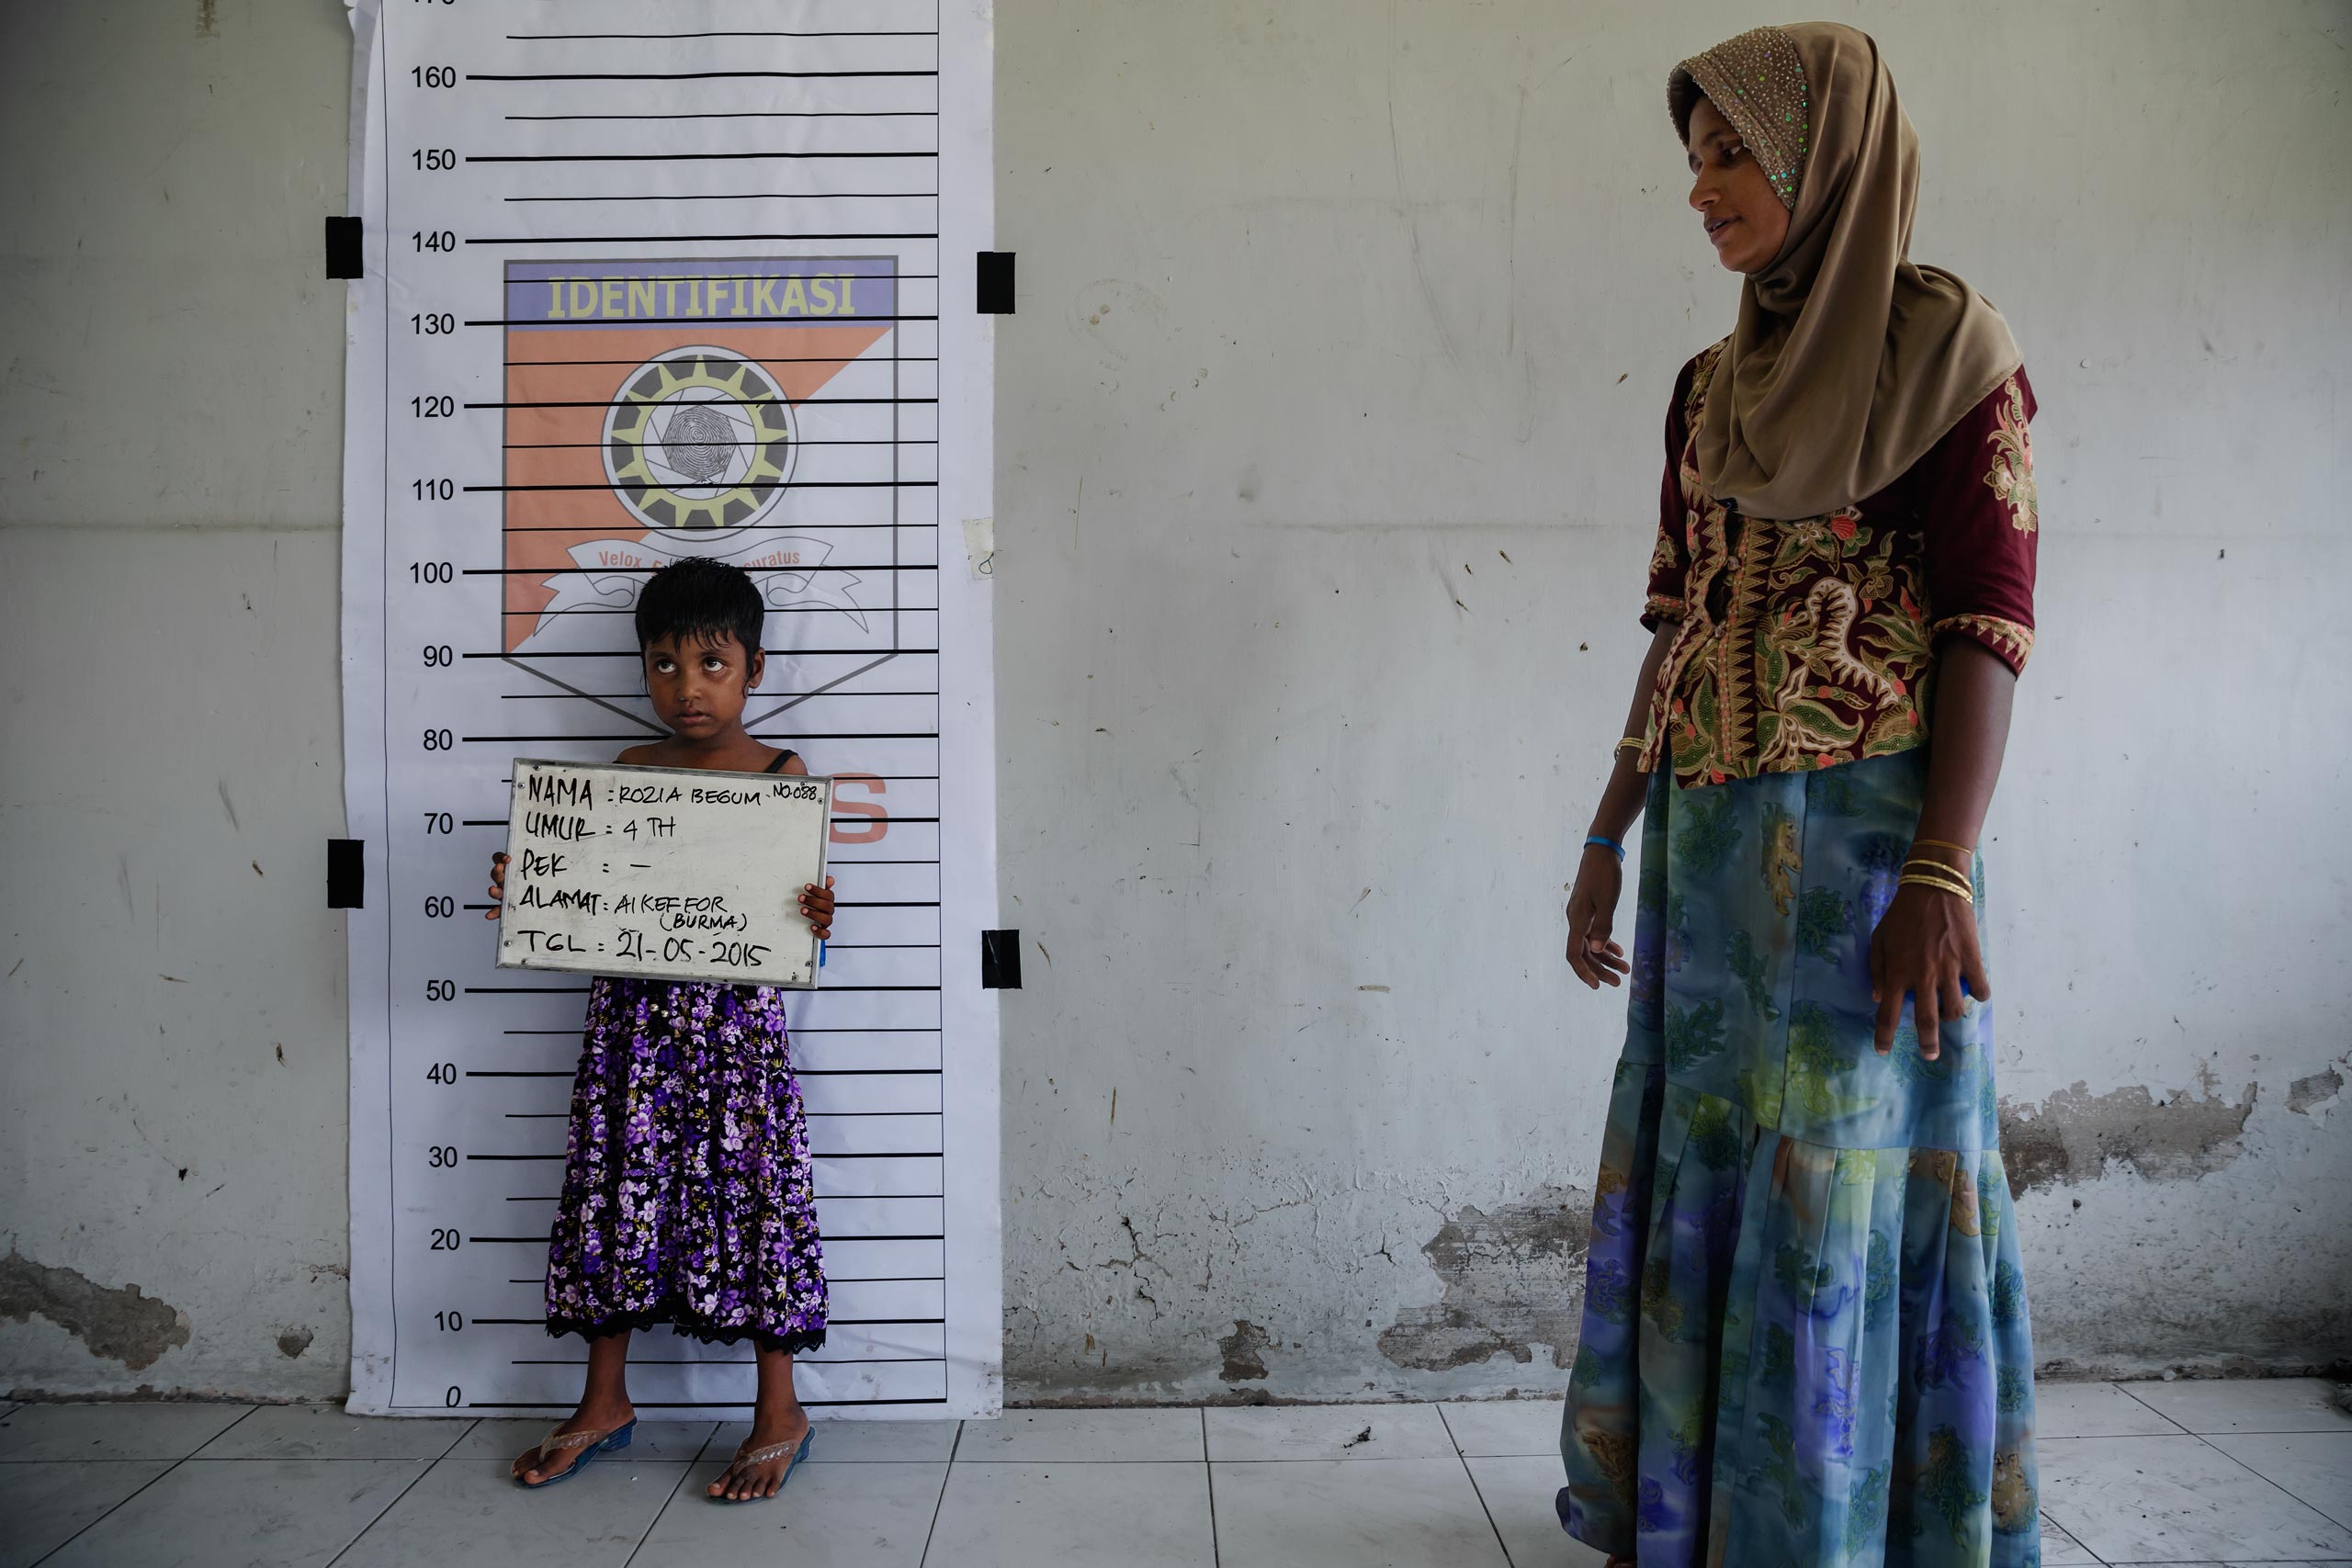 A Rohingya child is registered at a temporary shelter in Indonesia. (James Nachtwey for TIME)